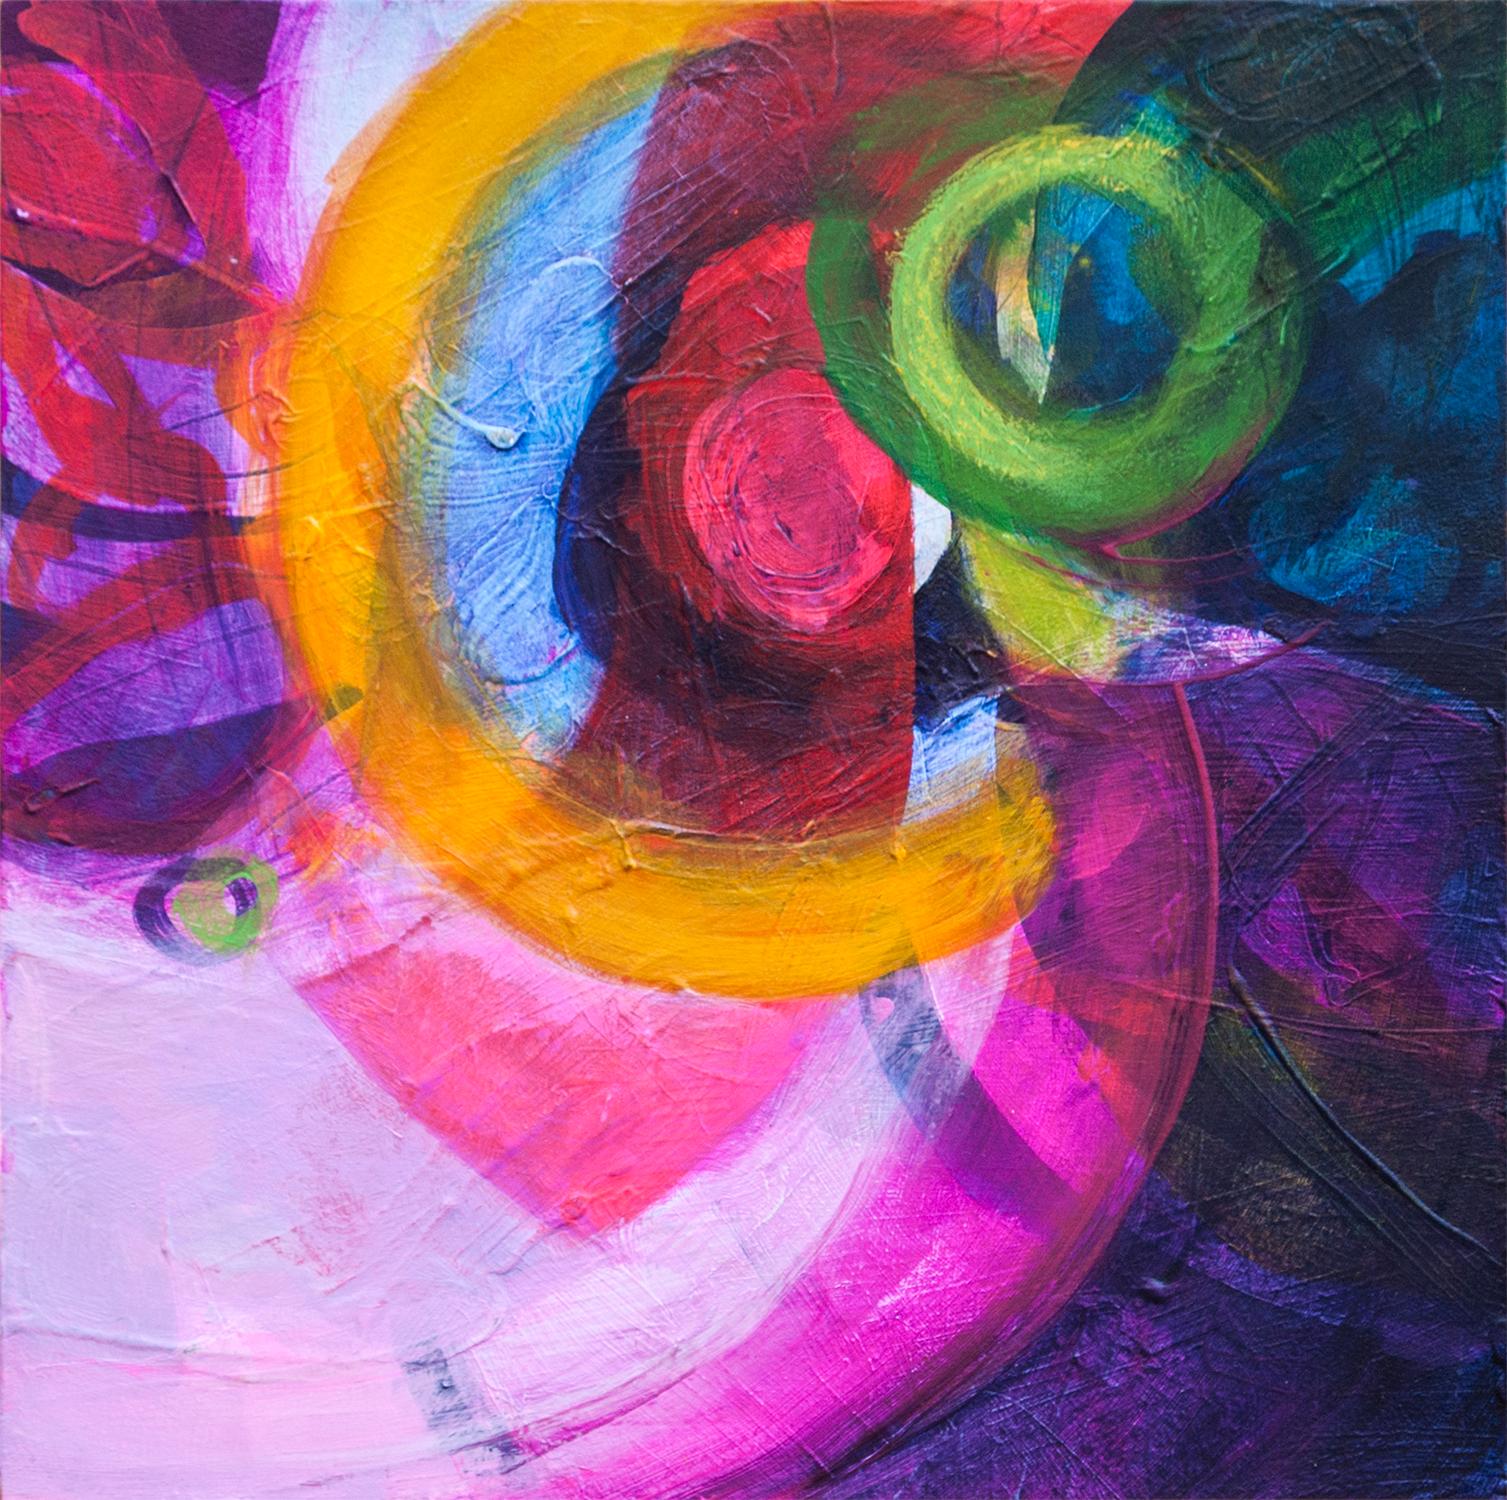 <p>Artist Comments<br />Many layers of circular shapes painted in deeply saturated colors. Pink, red, purple, blue, green and yellow contrast and blend together in textured unison.</p><br /><p>About the Artist<br />Ruth-Anne Siegel's vibrant floral